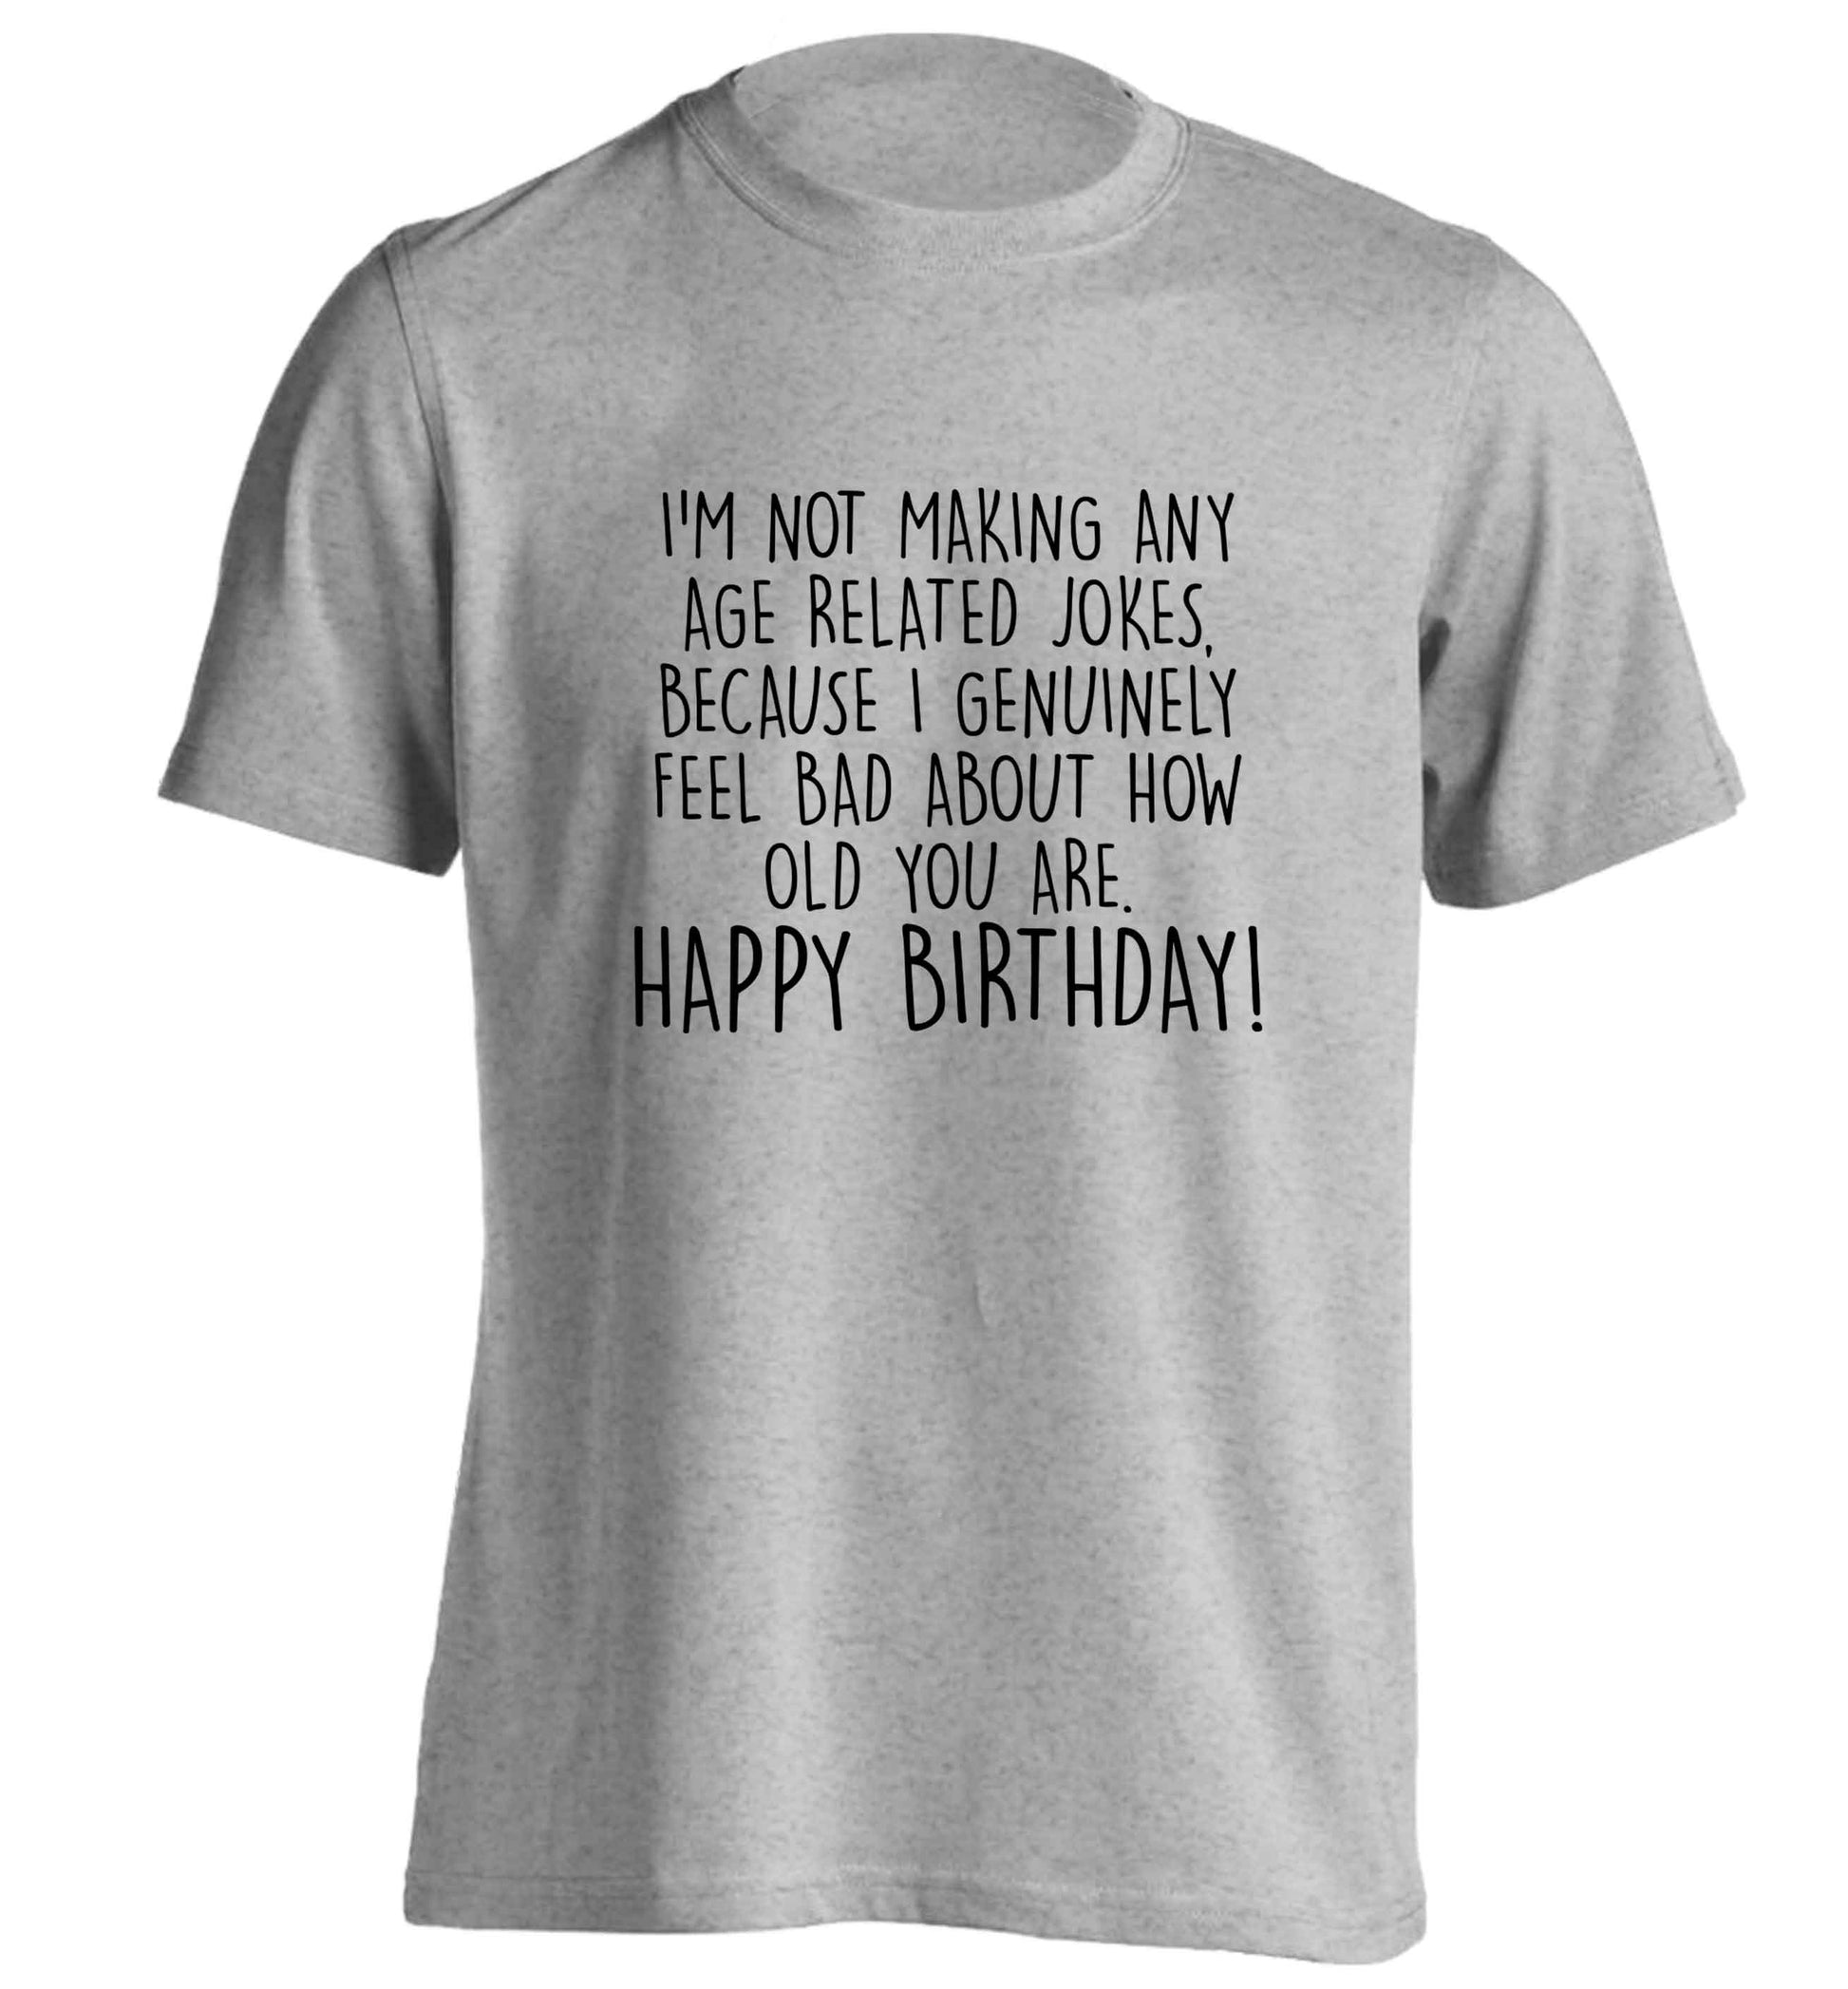 I'm not making any age related jokes because I genuinely feel bad for how old you are adults unisex grey Tshirt 2XL